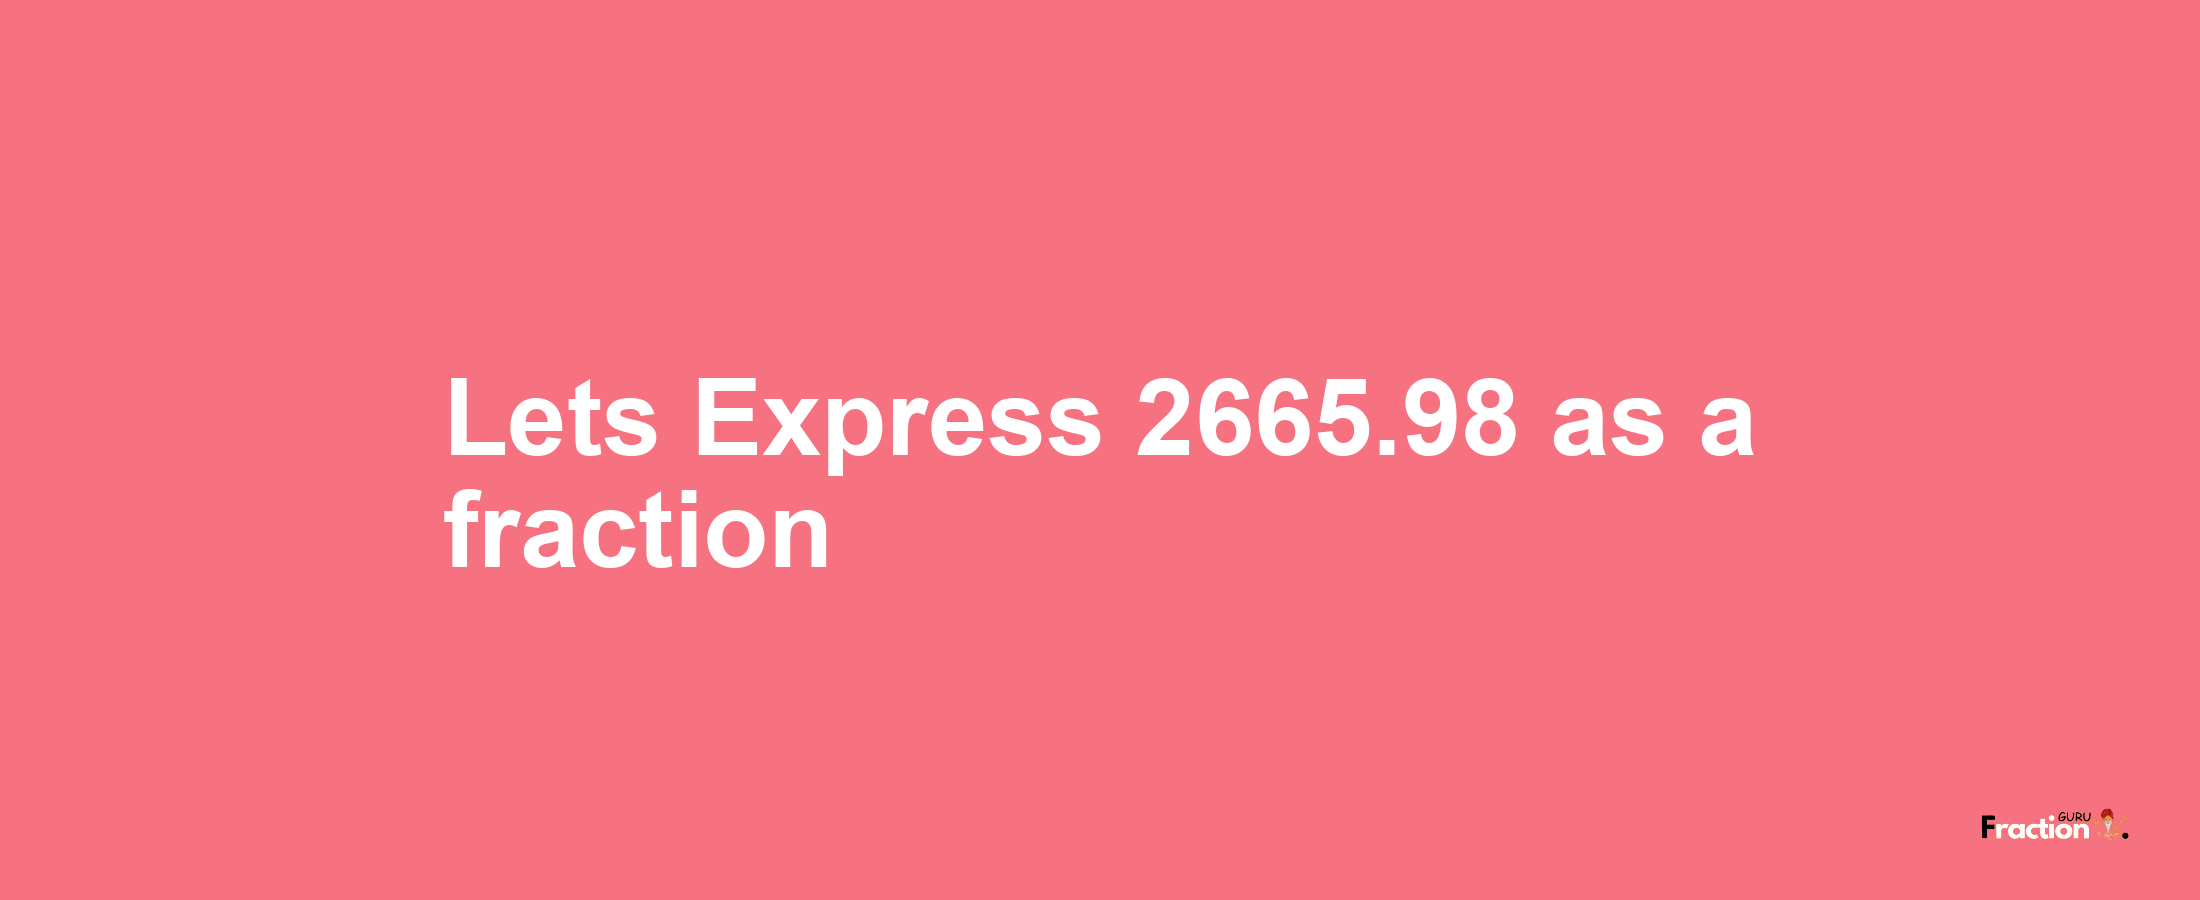 Lets Express 2665.98 as afraction